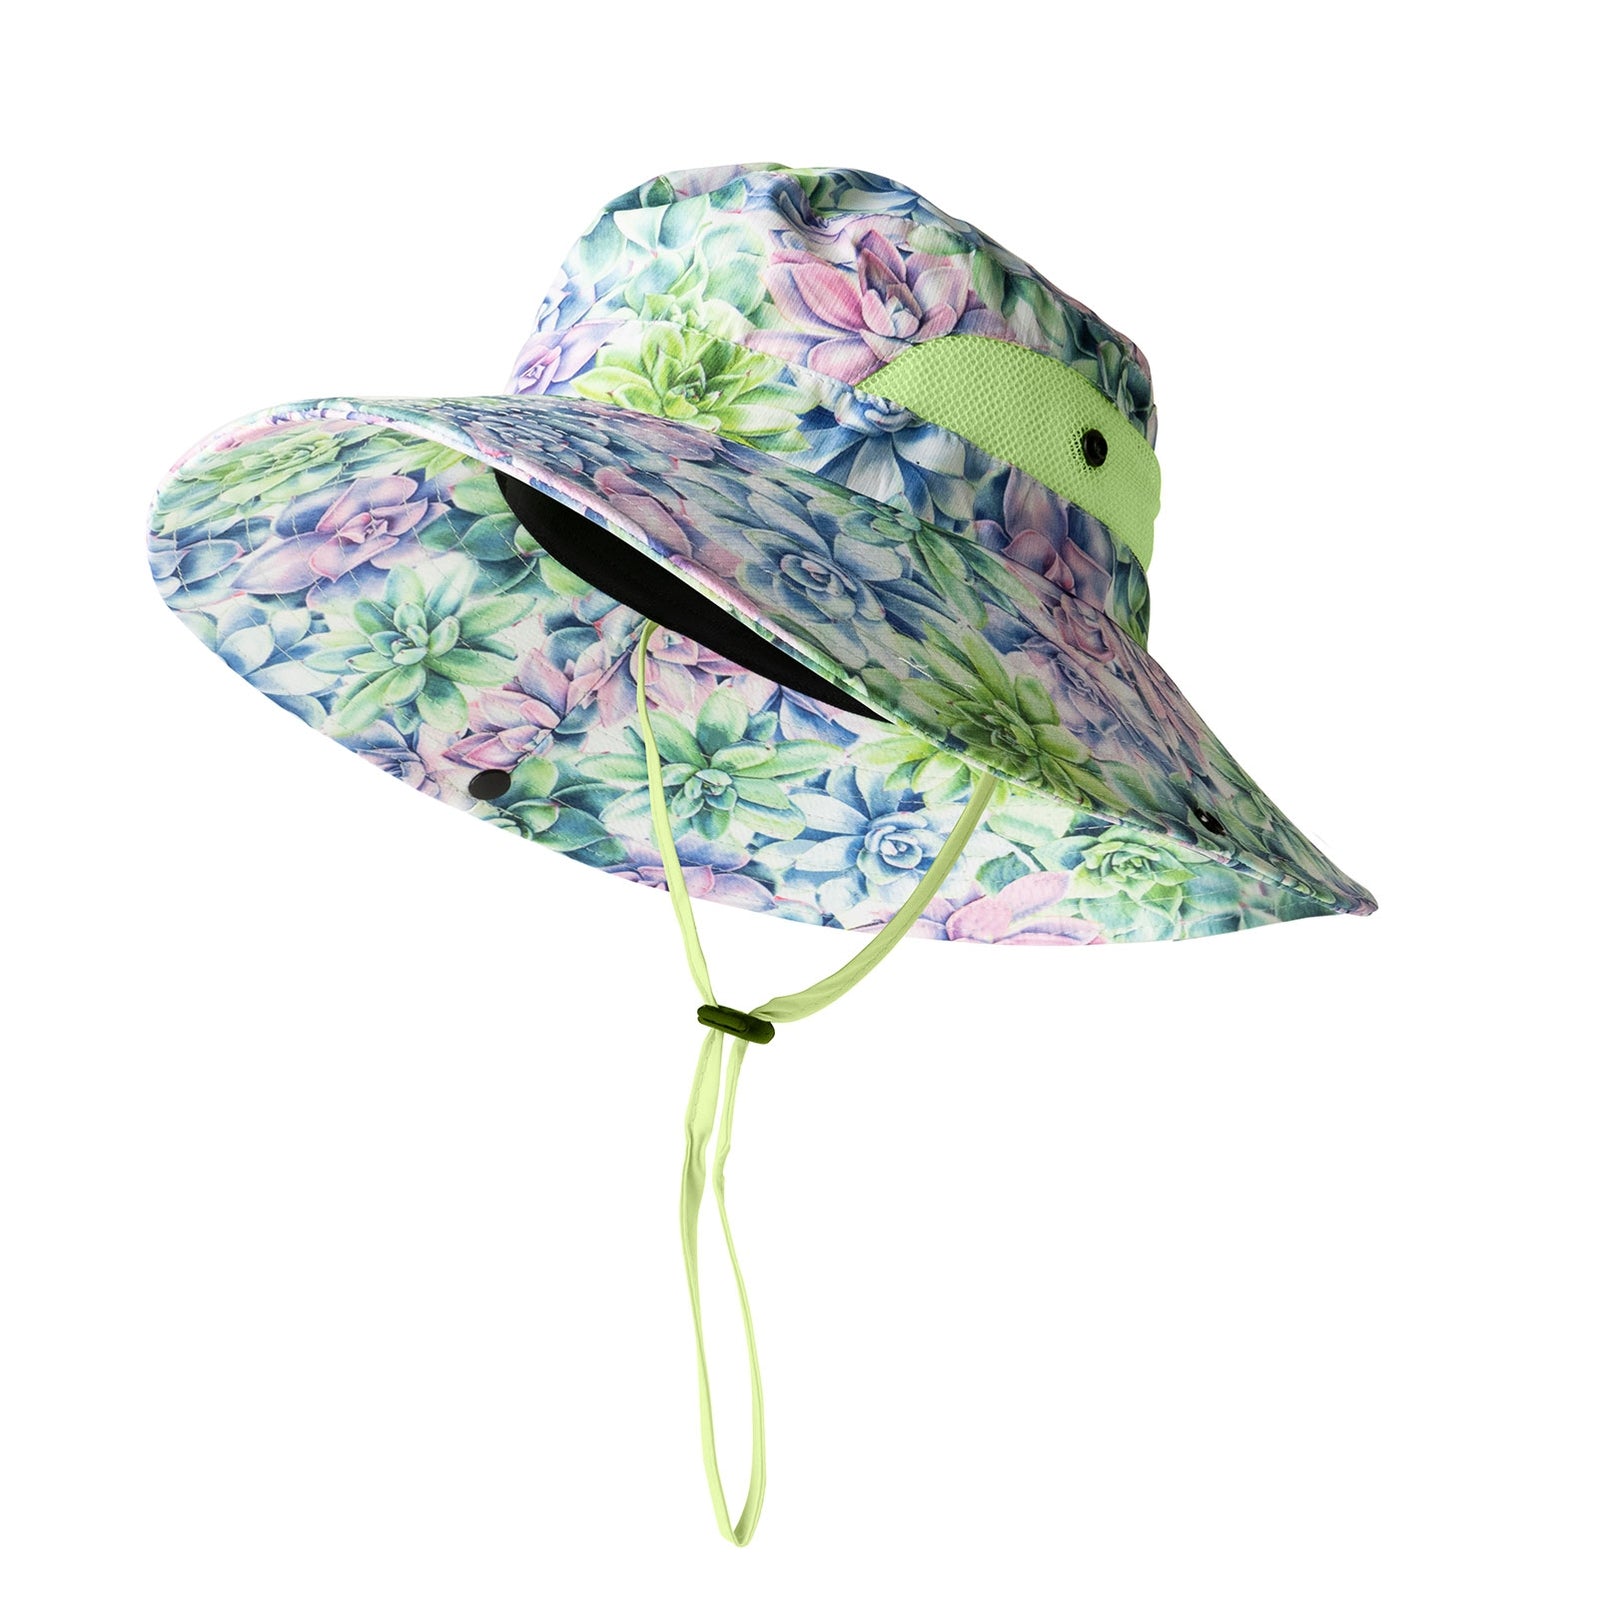 Seed & Sprout Gardening Hat Assortment